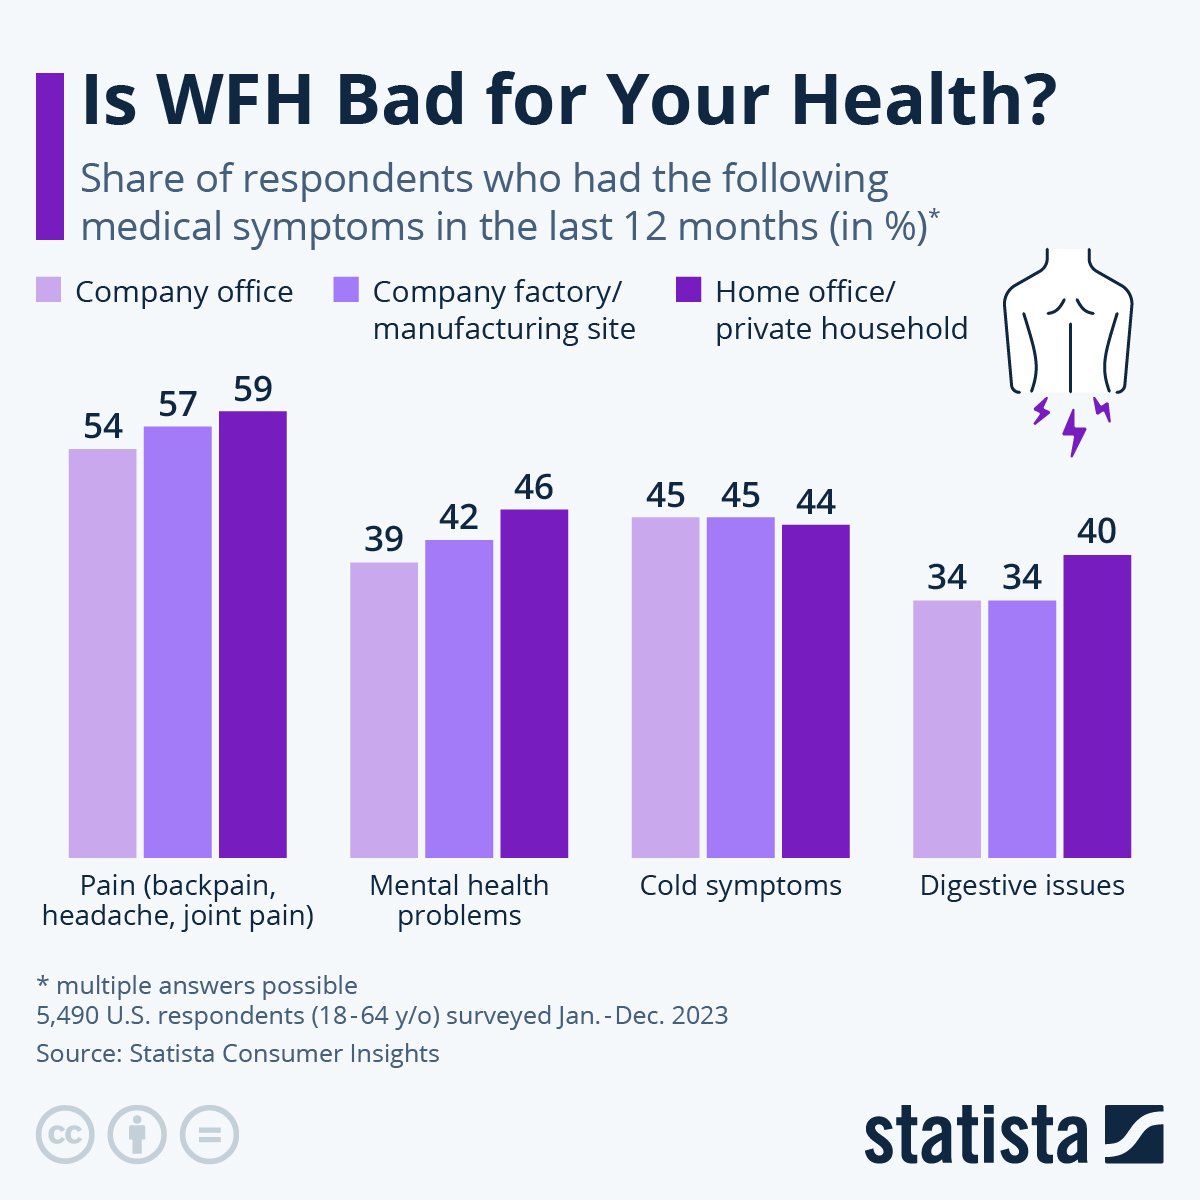 An infographic showing graph results to the question "Is WFH Bad for Your Health?".